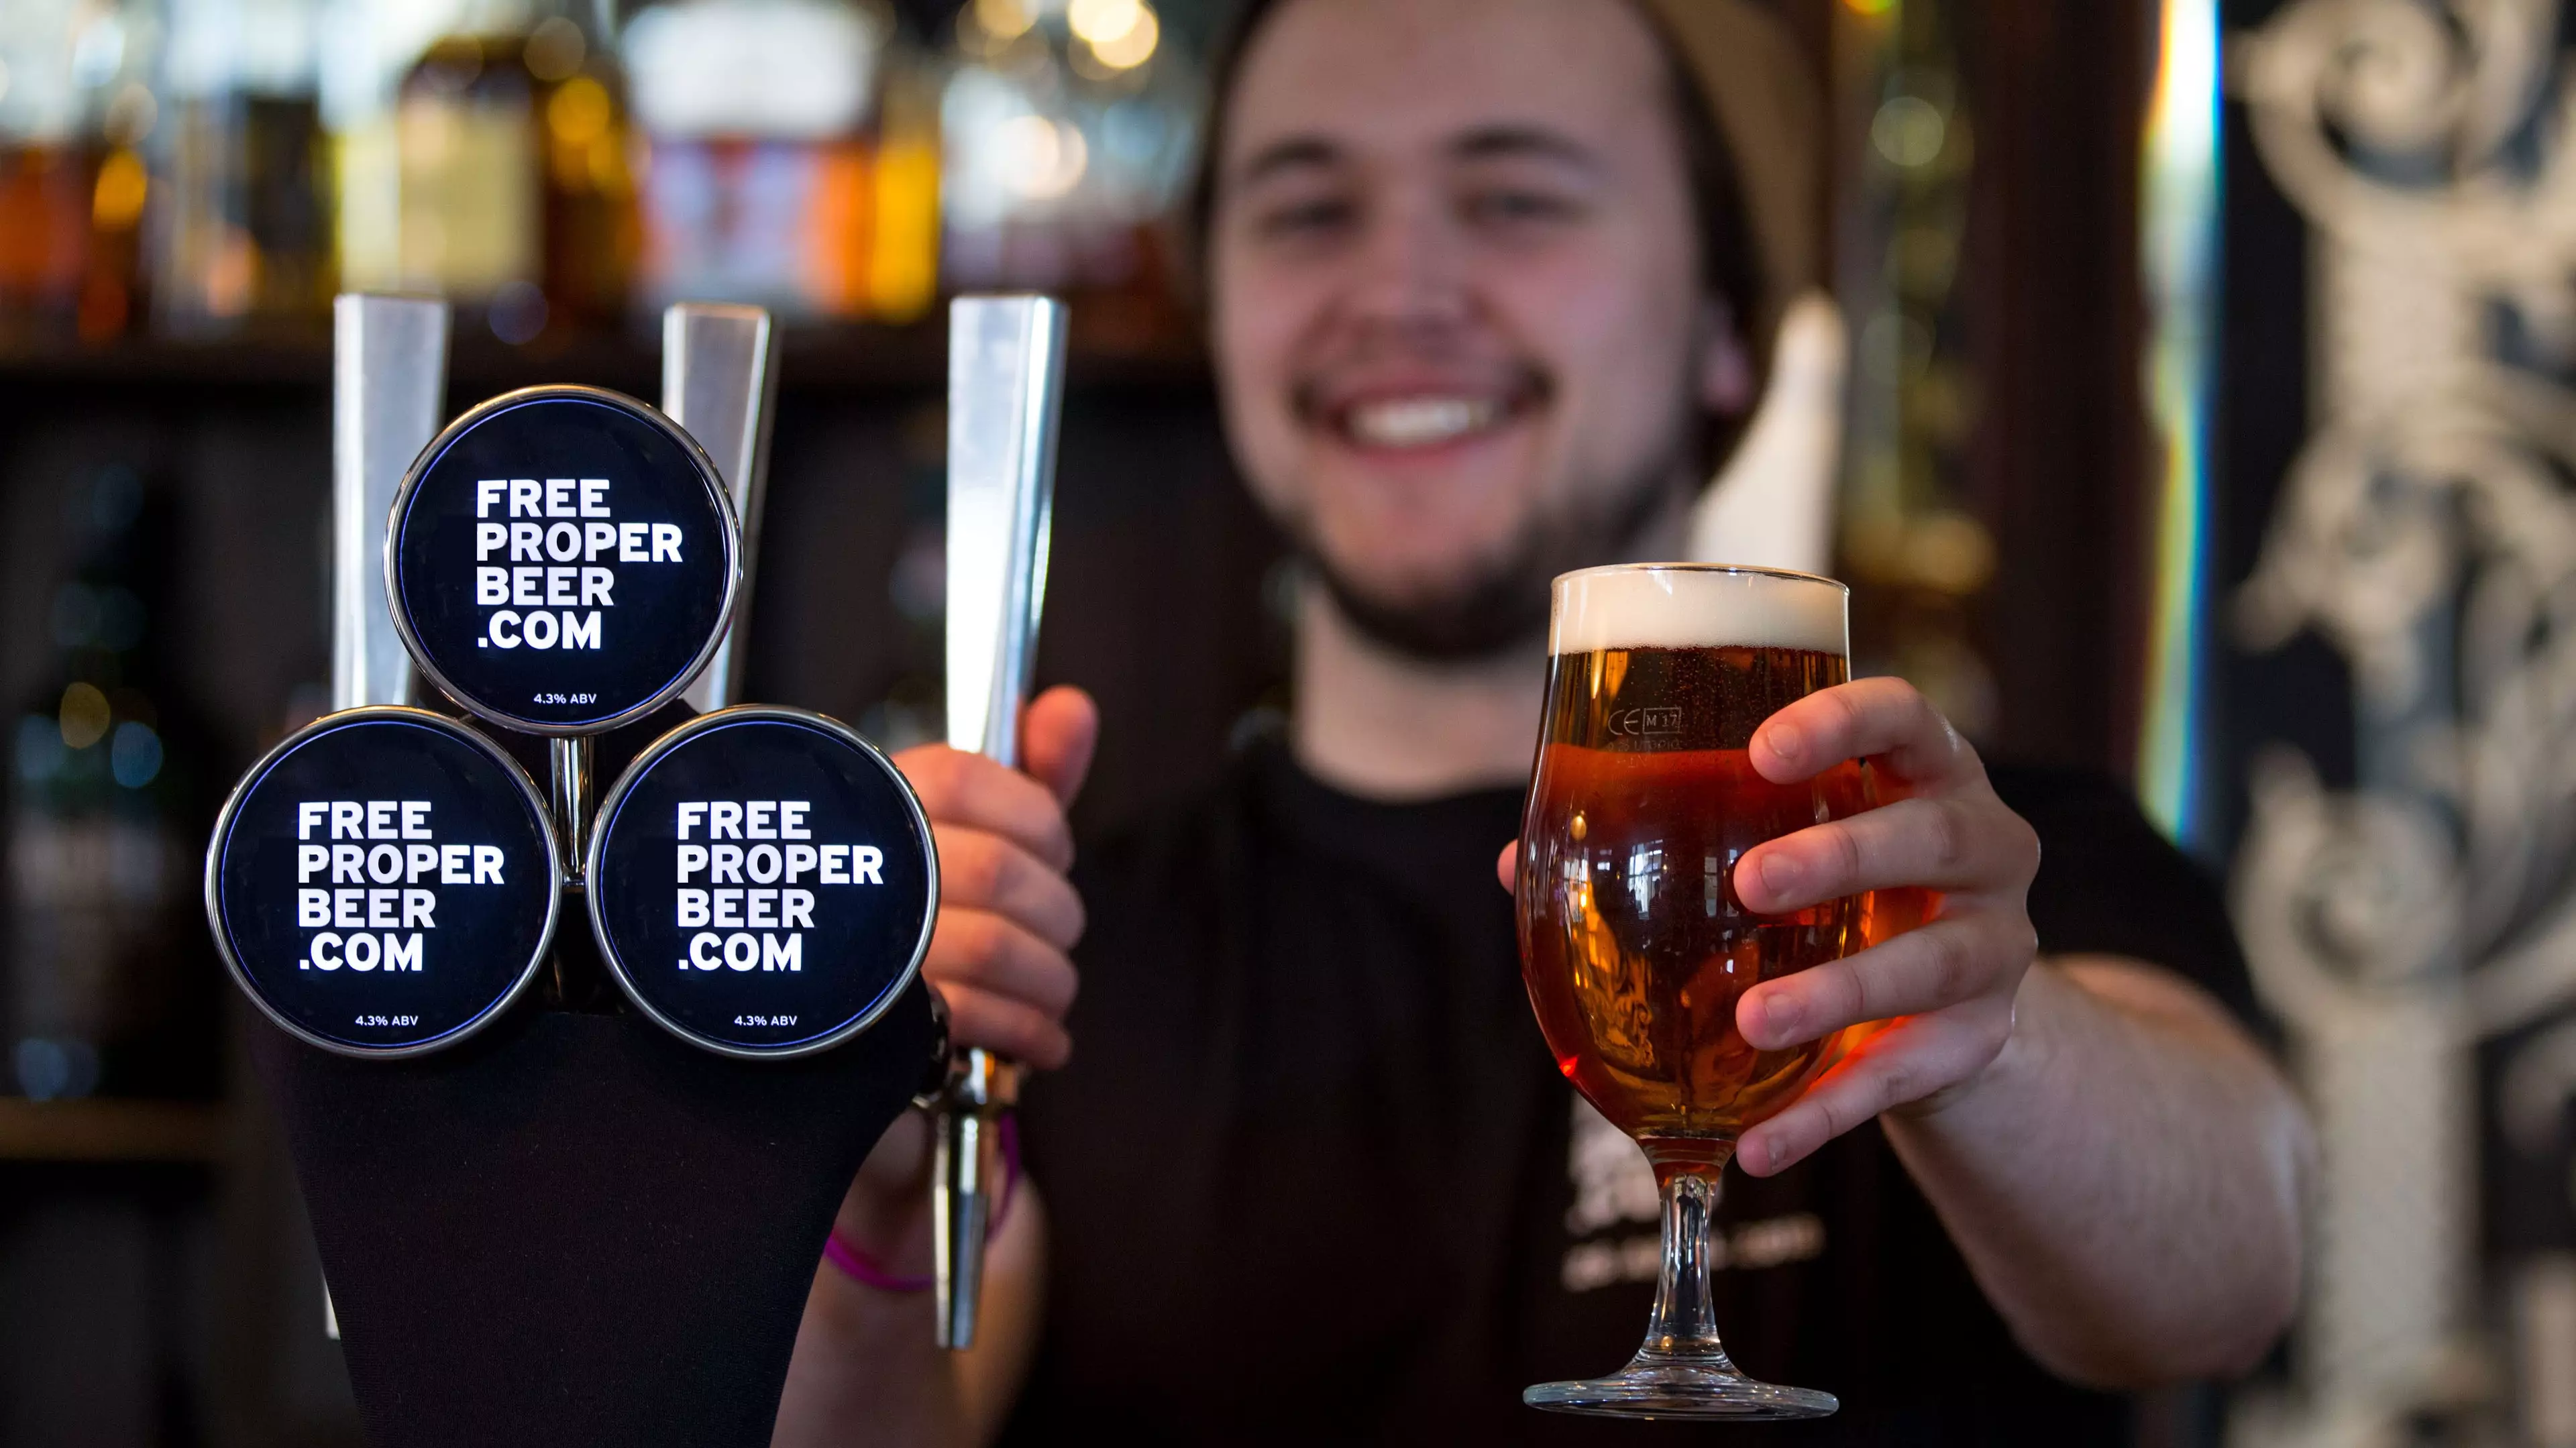 A Mystery Brewery Is Giving Away Free Proper Beer To Everyone In London – And We Want To Shout About It